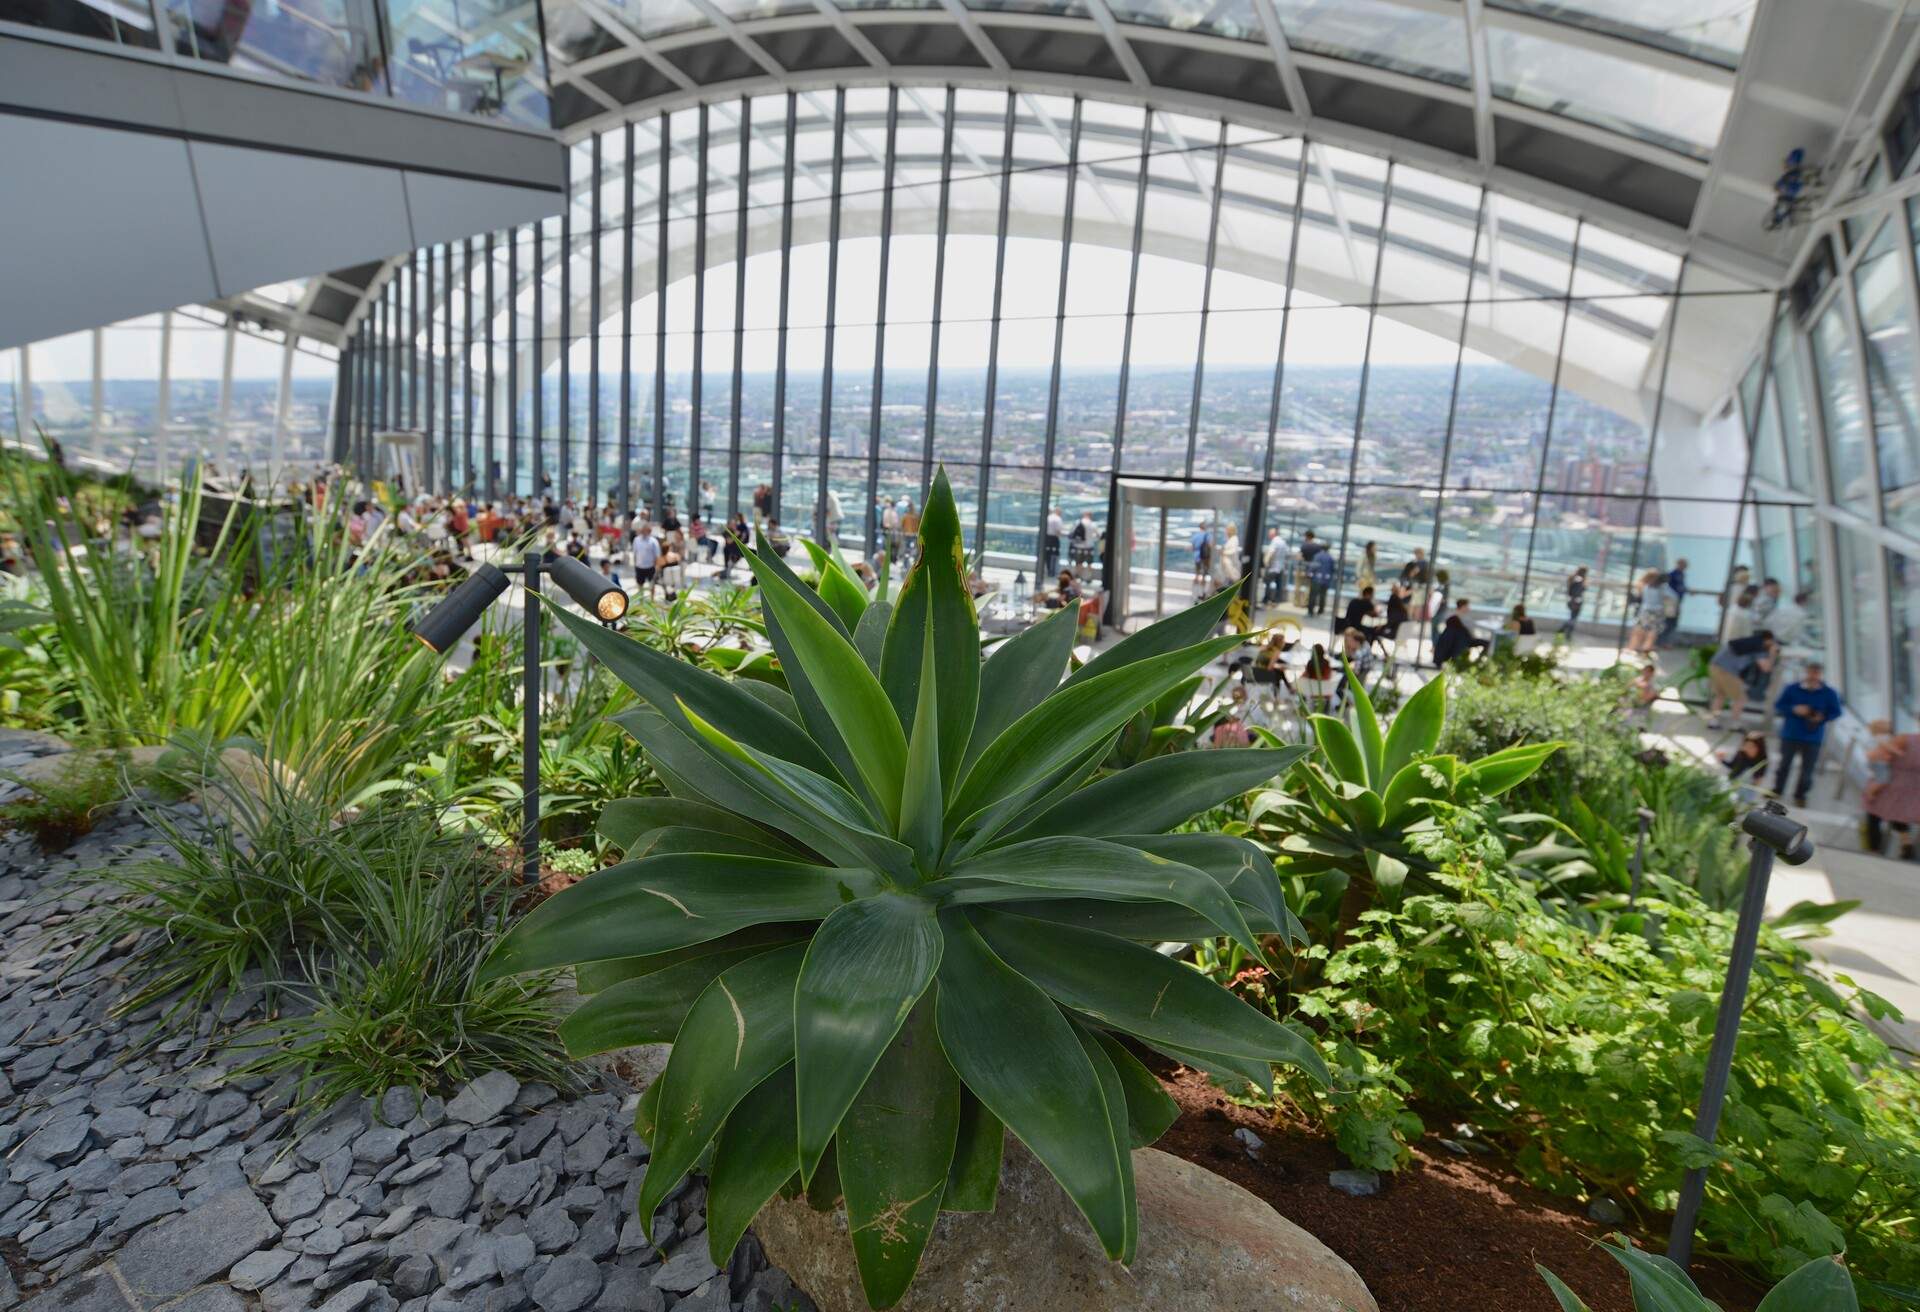 Numerous people are in a sky garden overlooking a cityscape through the glass windows.